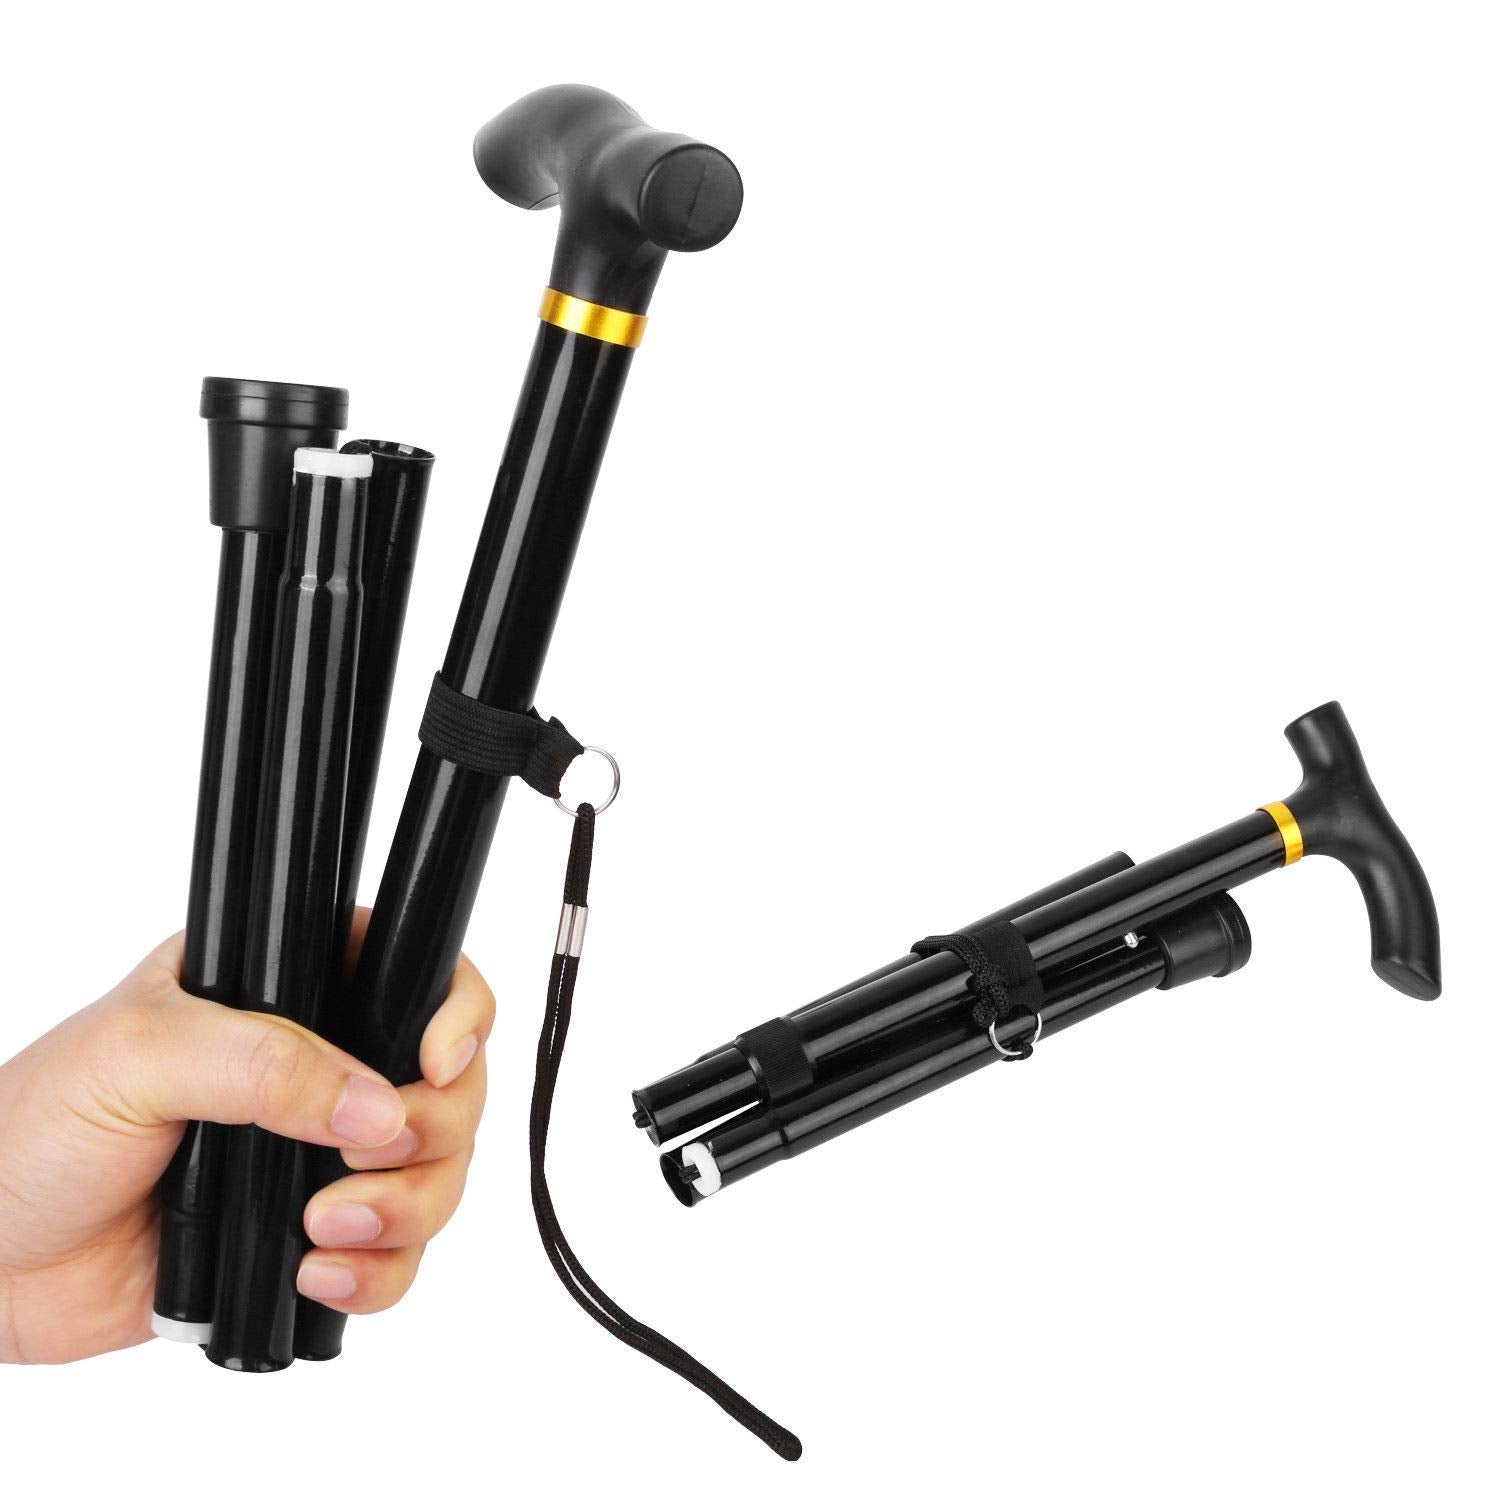 🔥Give First 100 Customers A Spare Armrest As A Gift🔥 Aluminum Alloy Telescopic Folding Cane